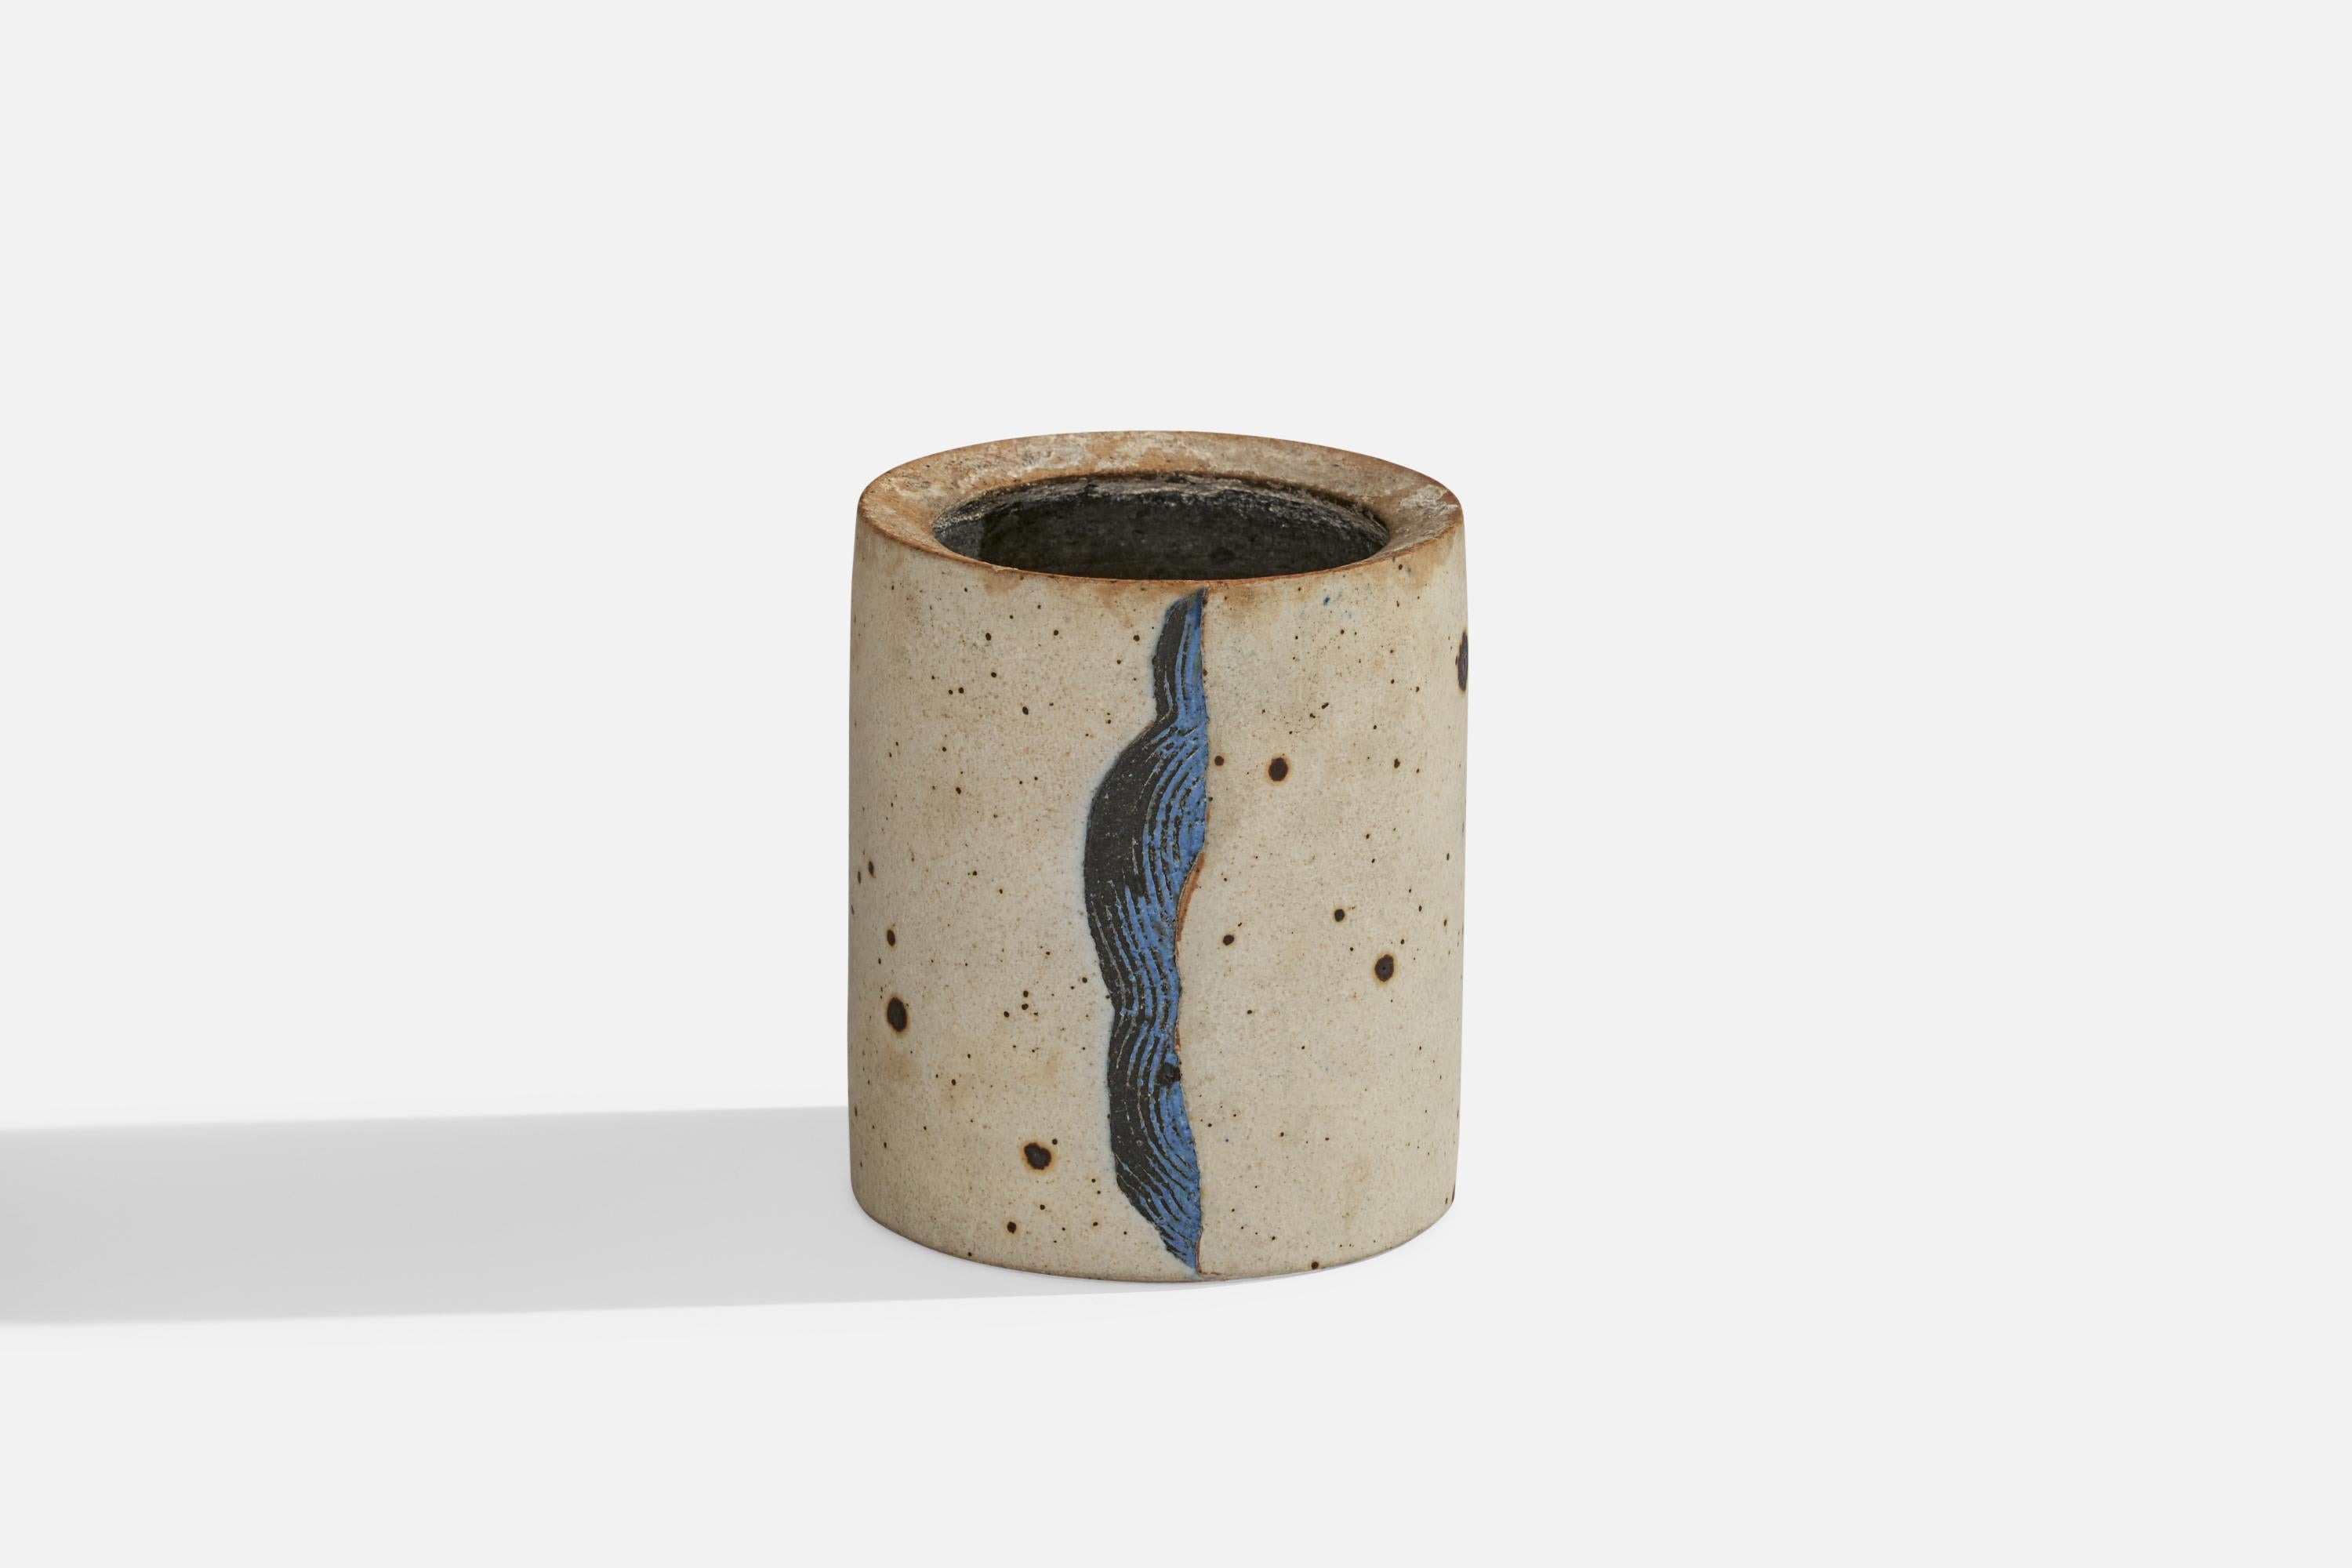 A grey and blue ceramic vase designed and produced by Bodil Manz, Denmark, c. 1980s.